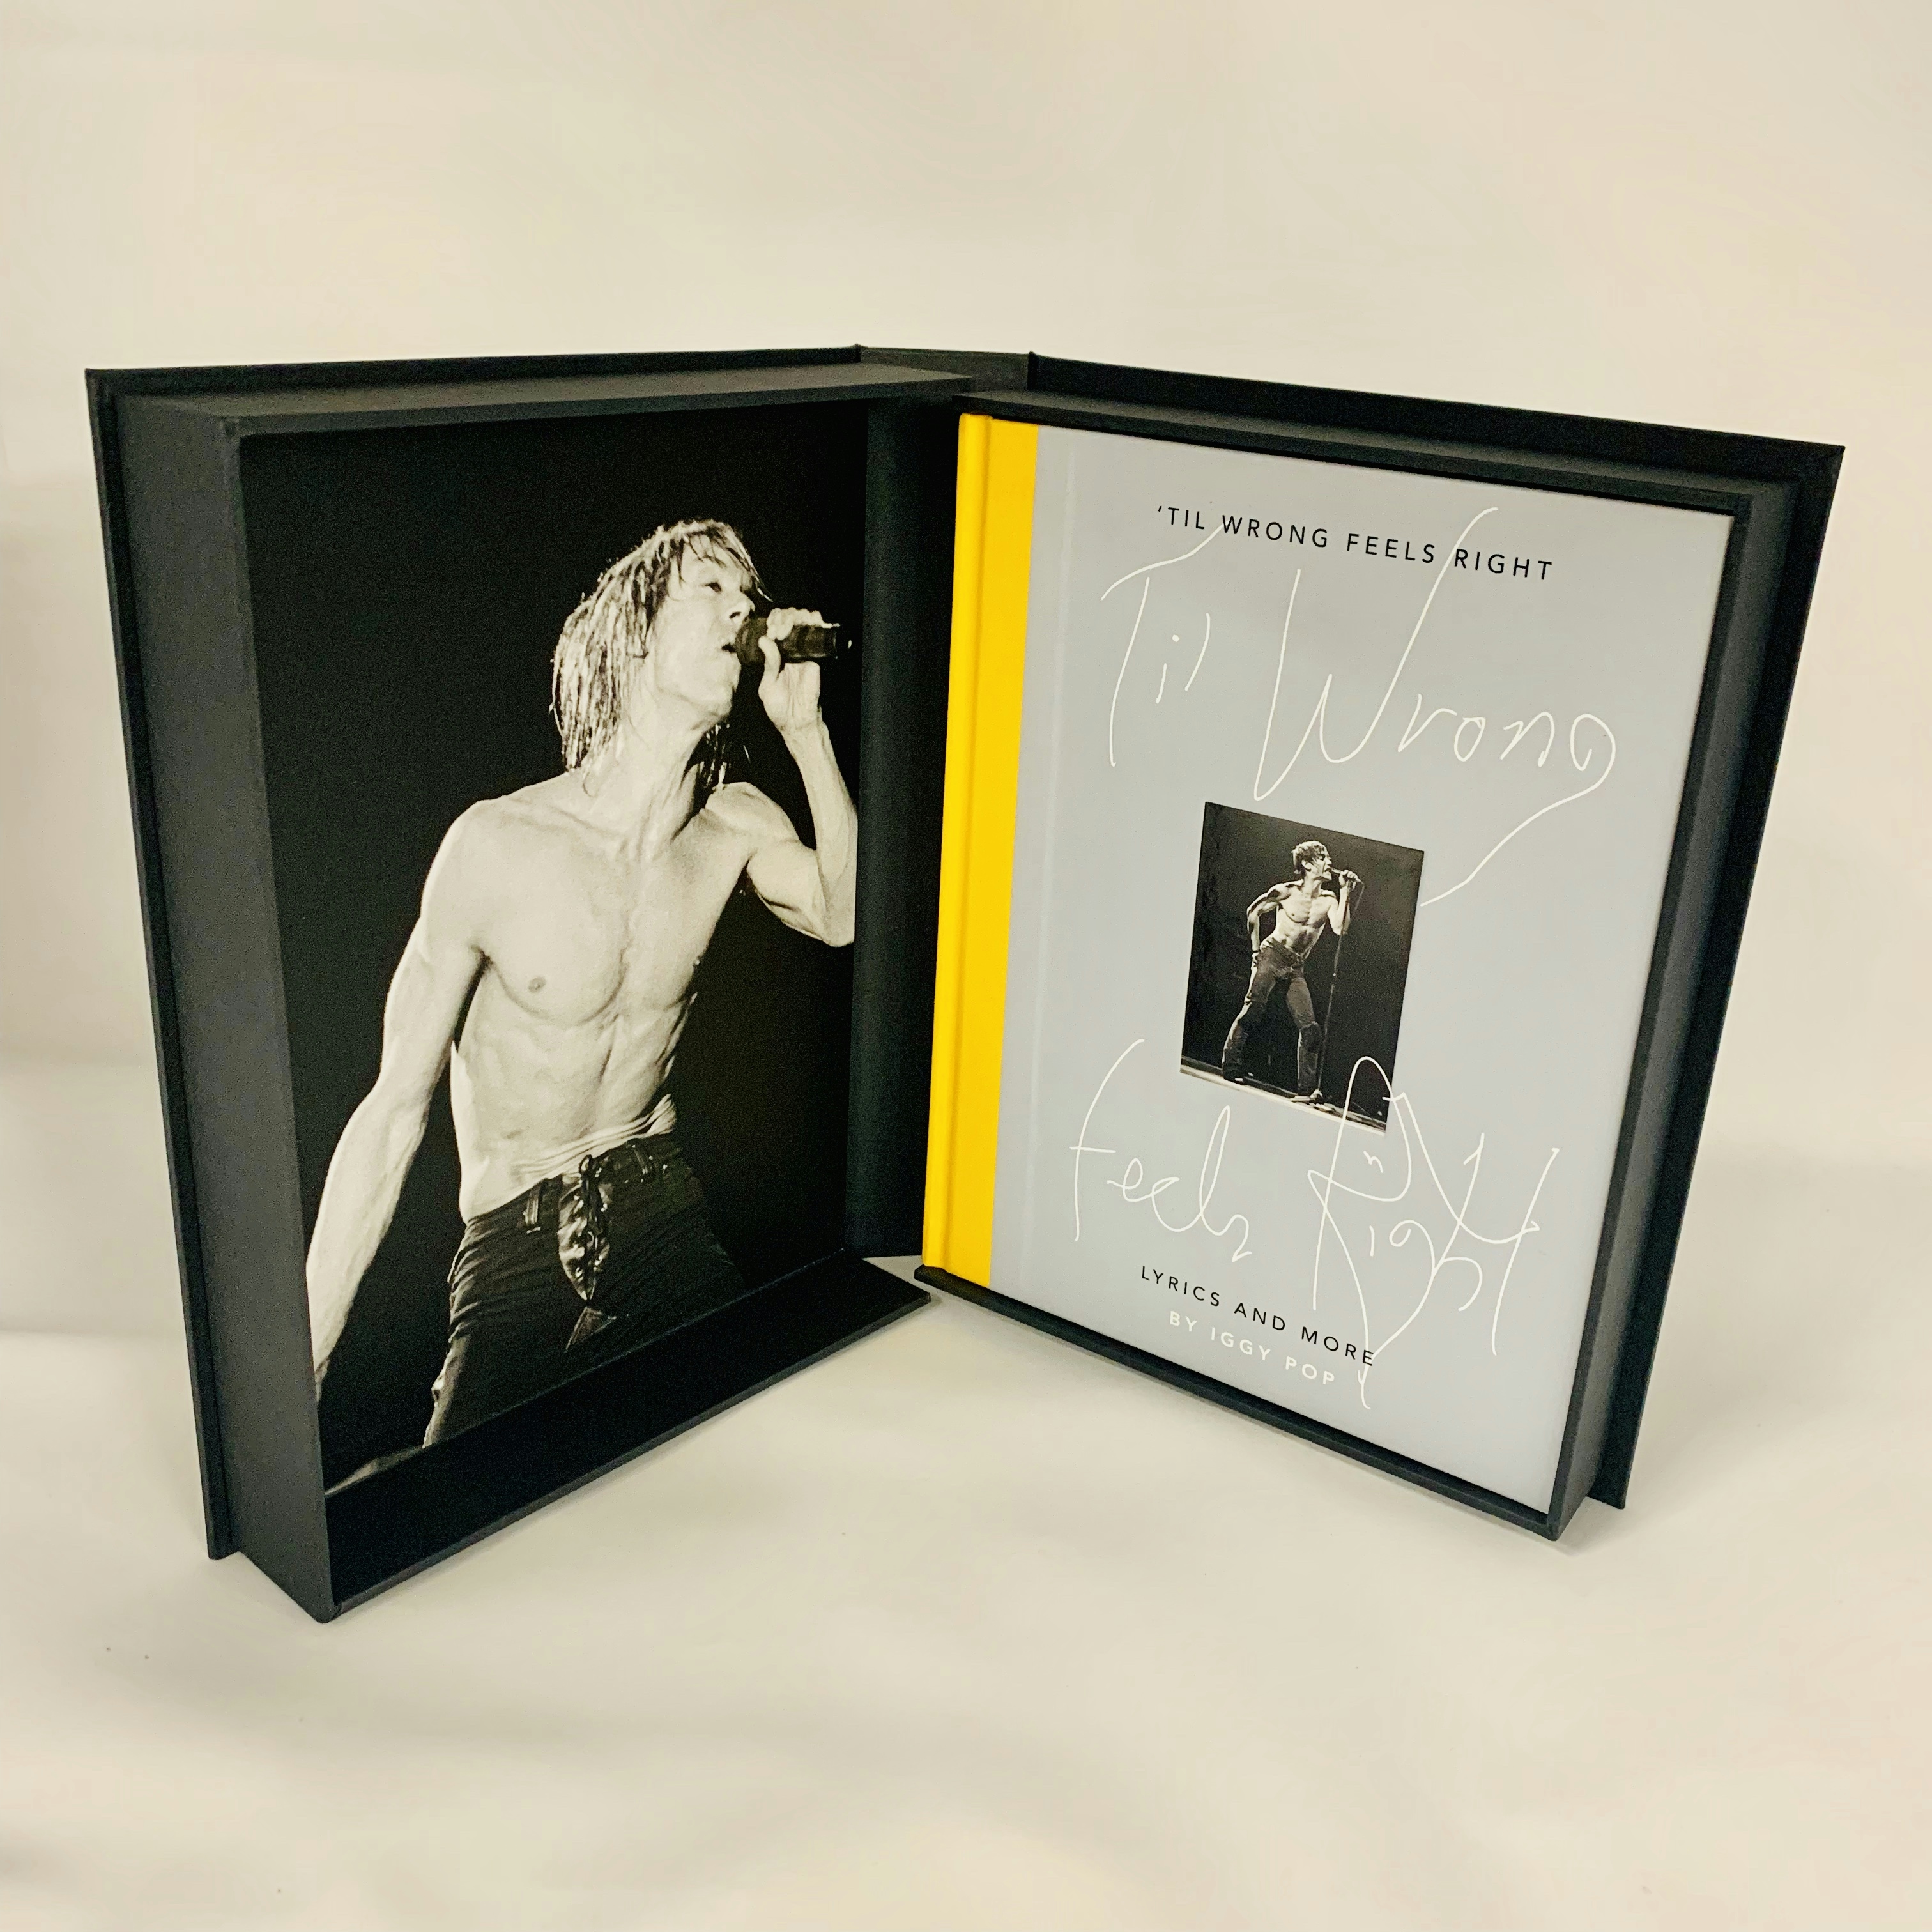 Album artwork for 'til Wrong Feels Right - Lyrics and More - DELUXE EDITION by Iggy Pop